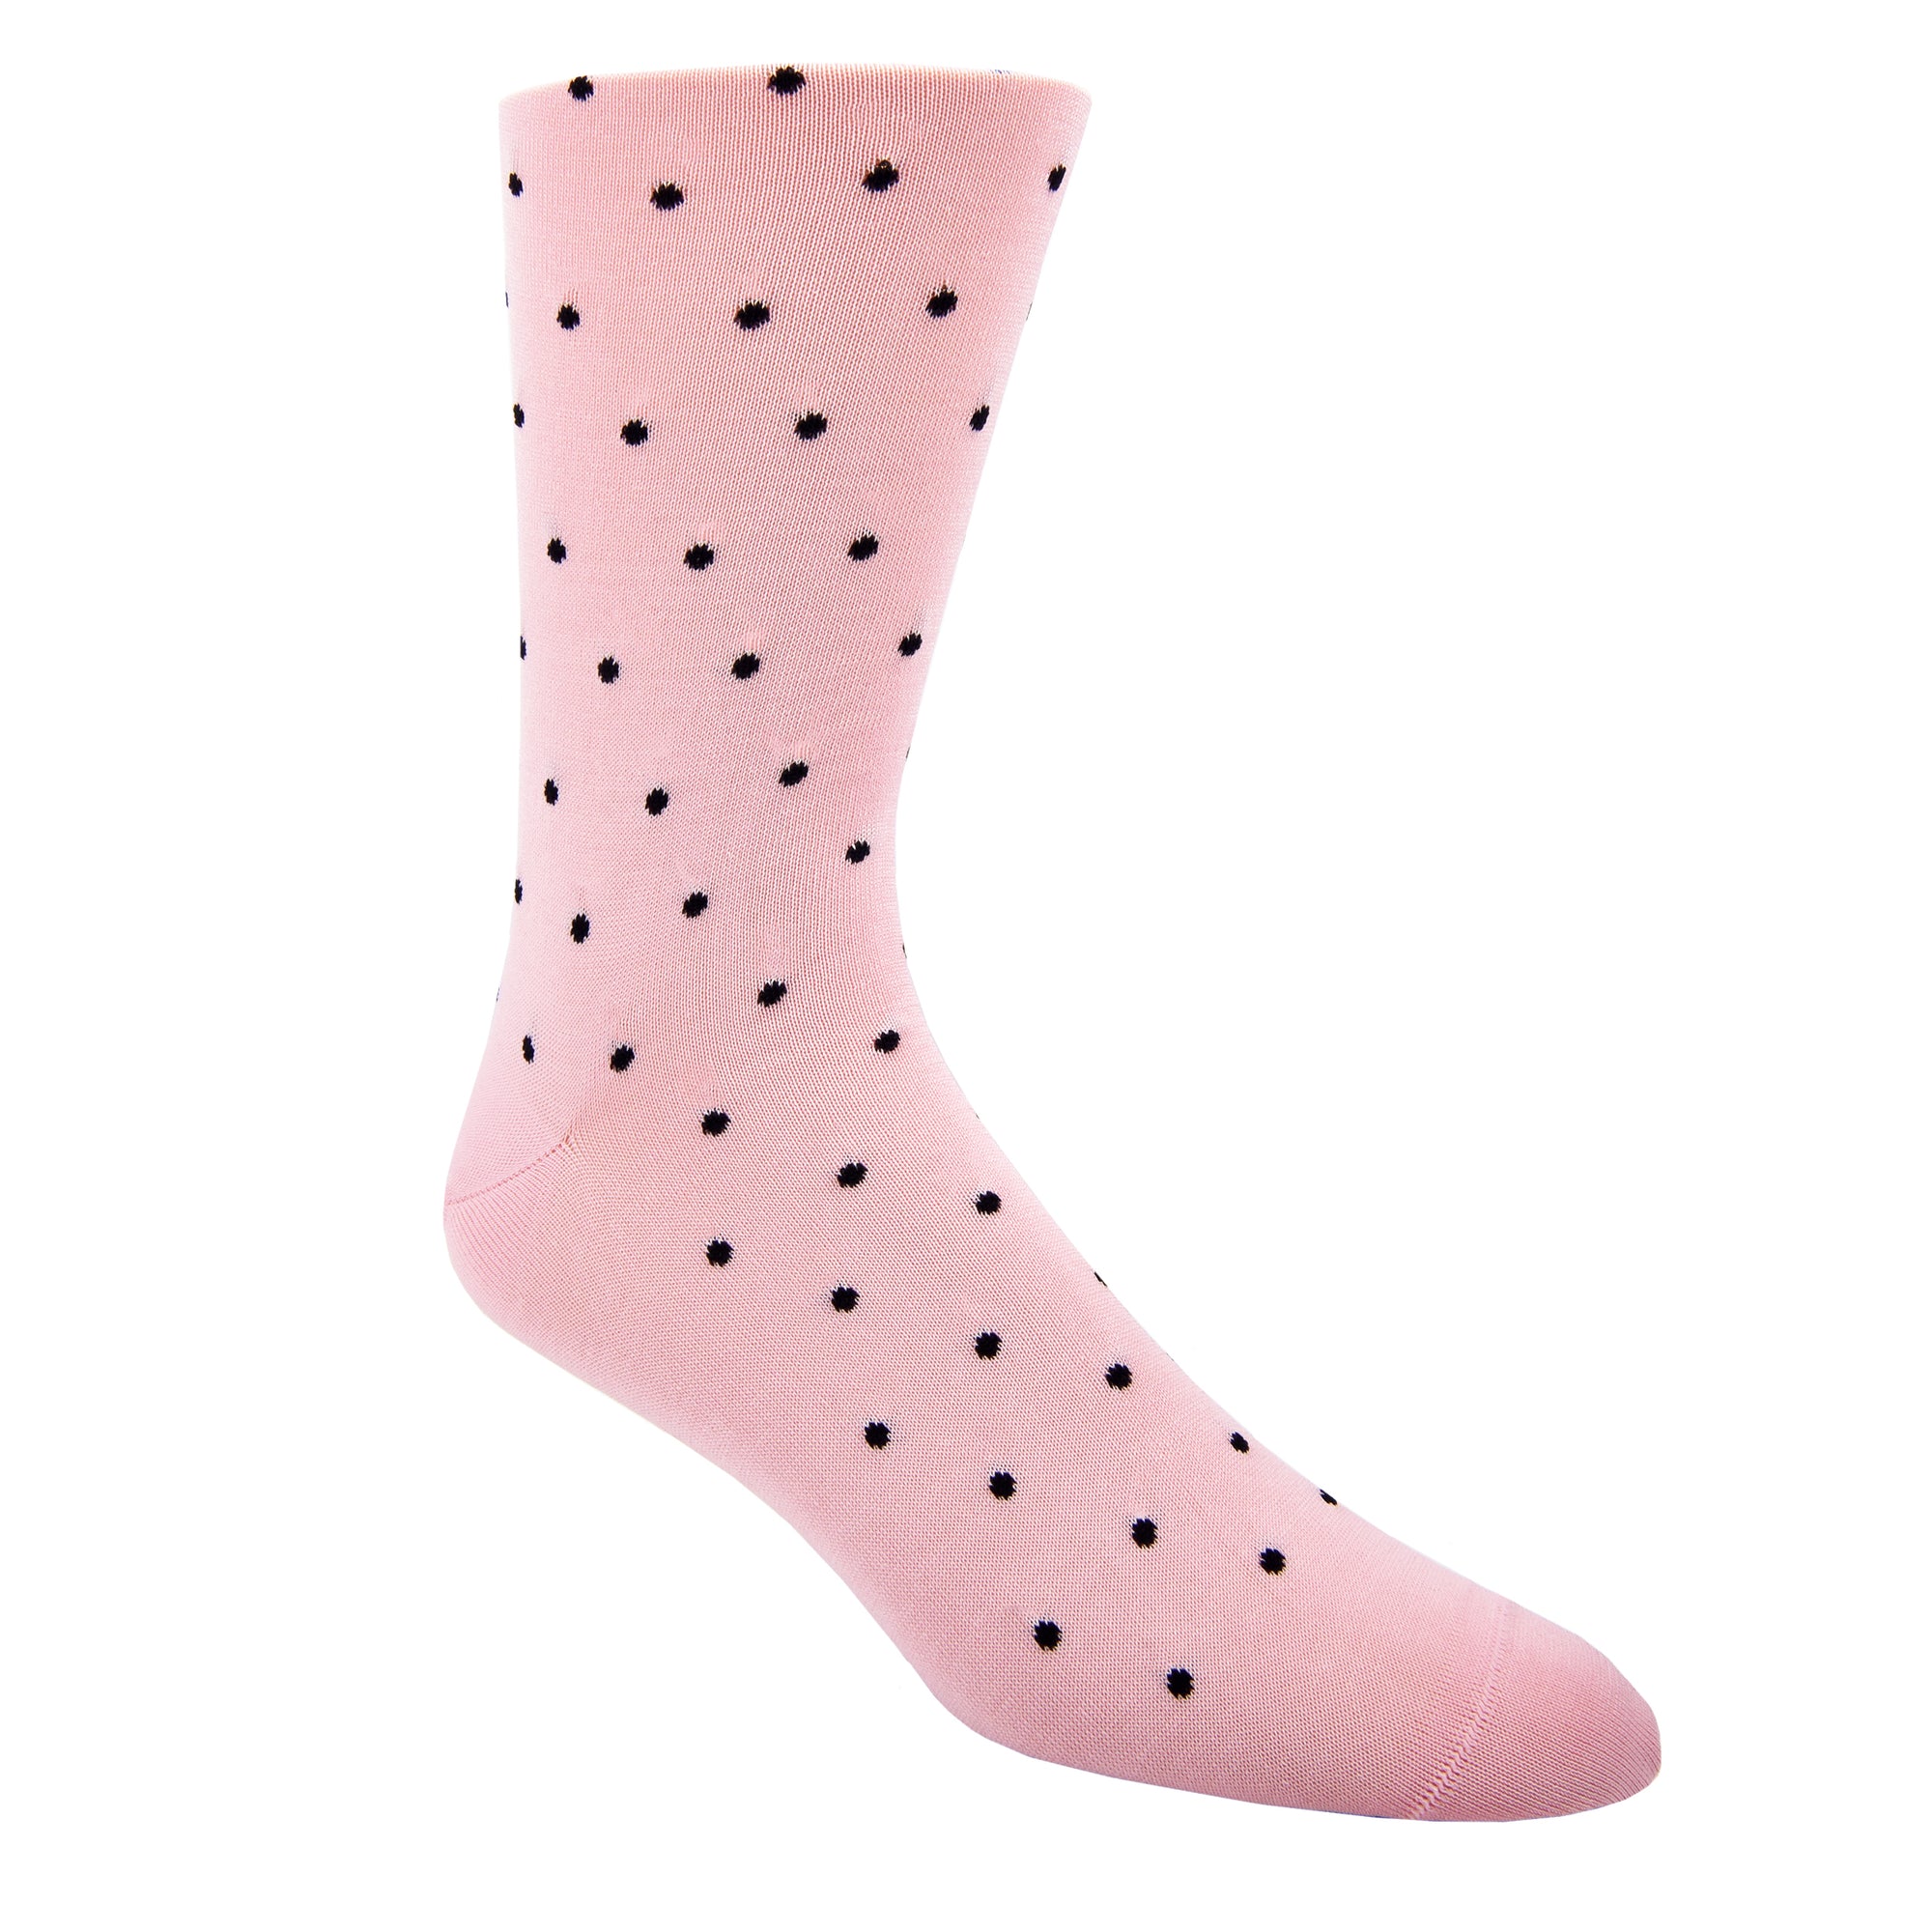 Pretty in pink and ready to buy the first round. Life is too short to wear boring socks! #damnright  70% Mercerized Cotton 29% Nylon 1% Spandex Fits Size 8-12 Machine Washable Made in the USA